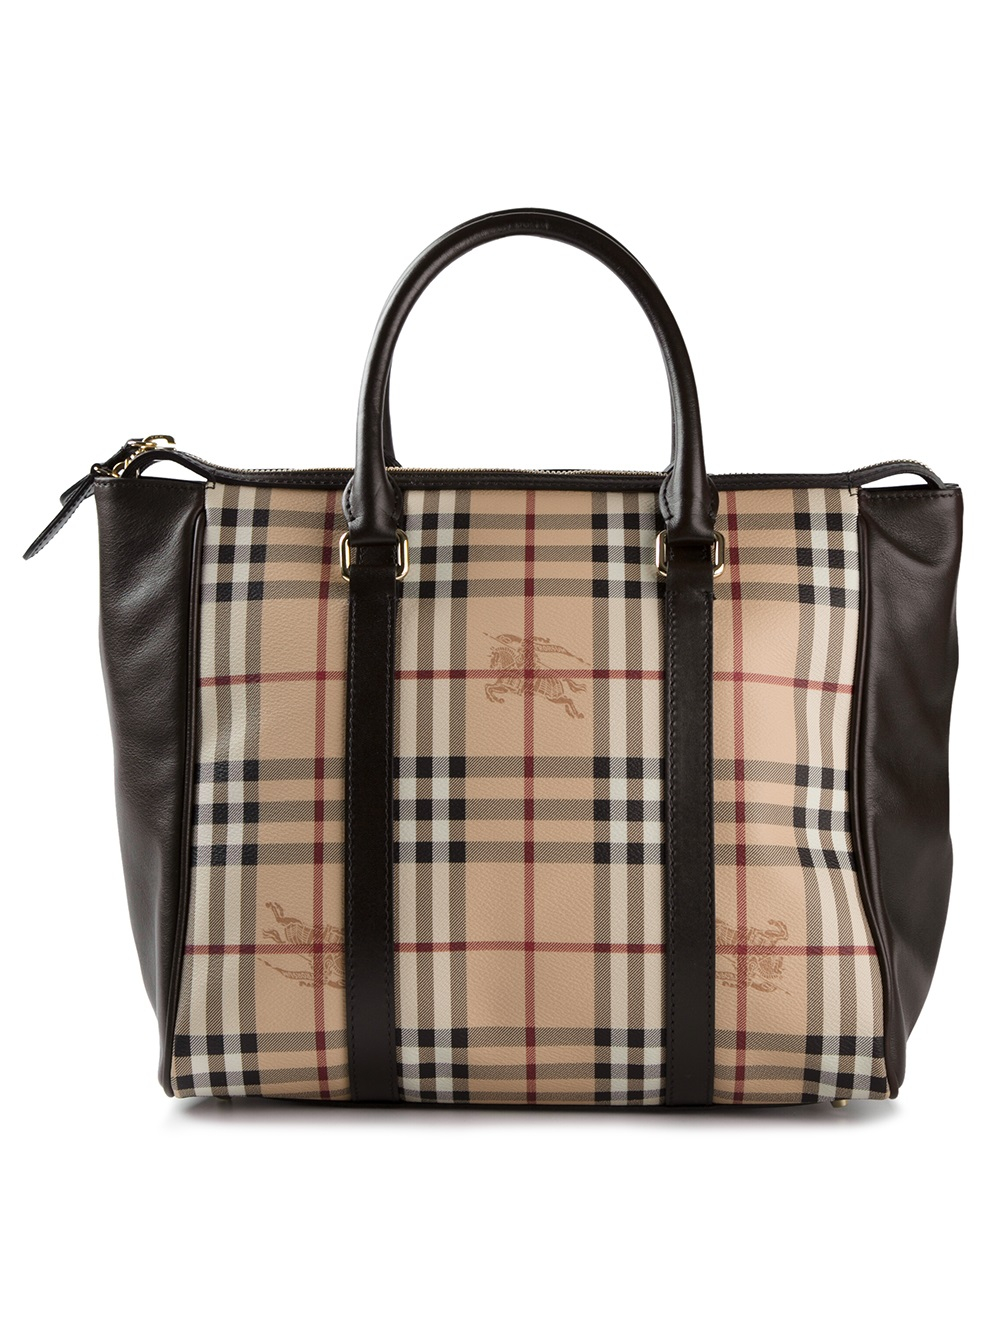 Lyst - Burberry Haymarket Tote in Natural